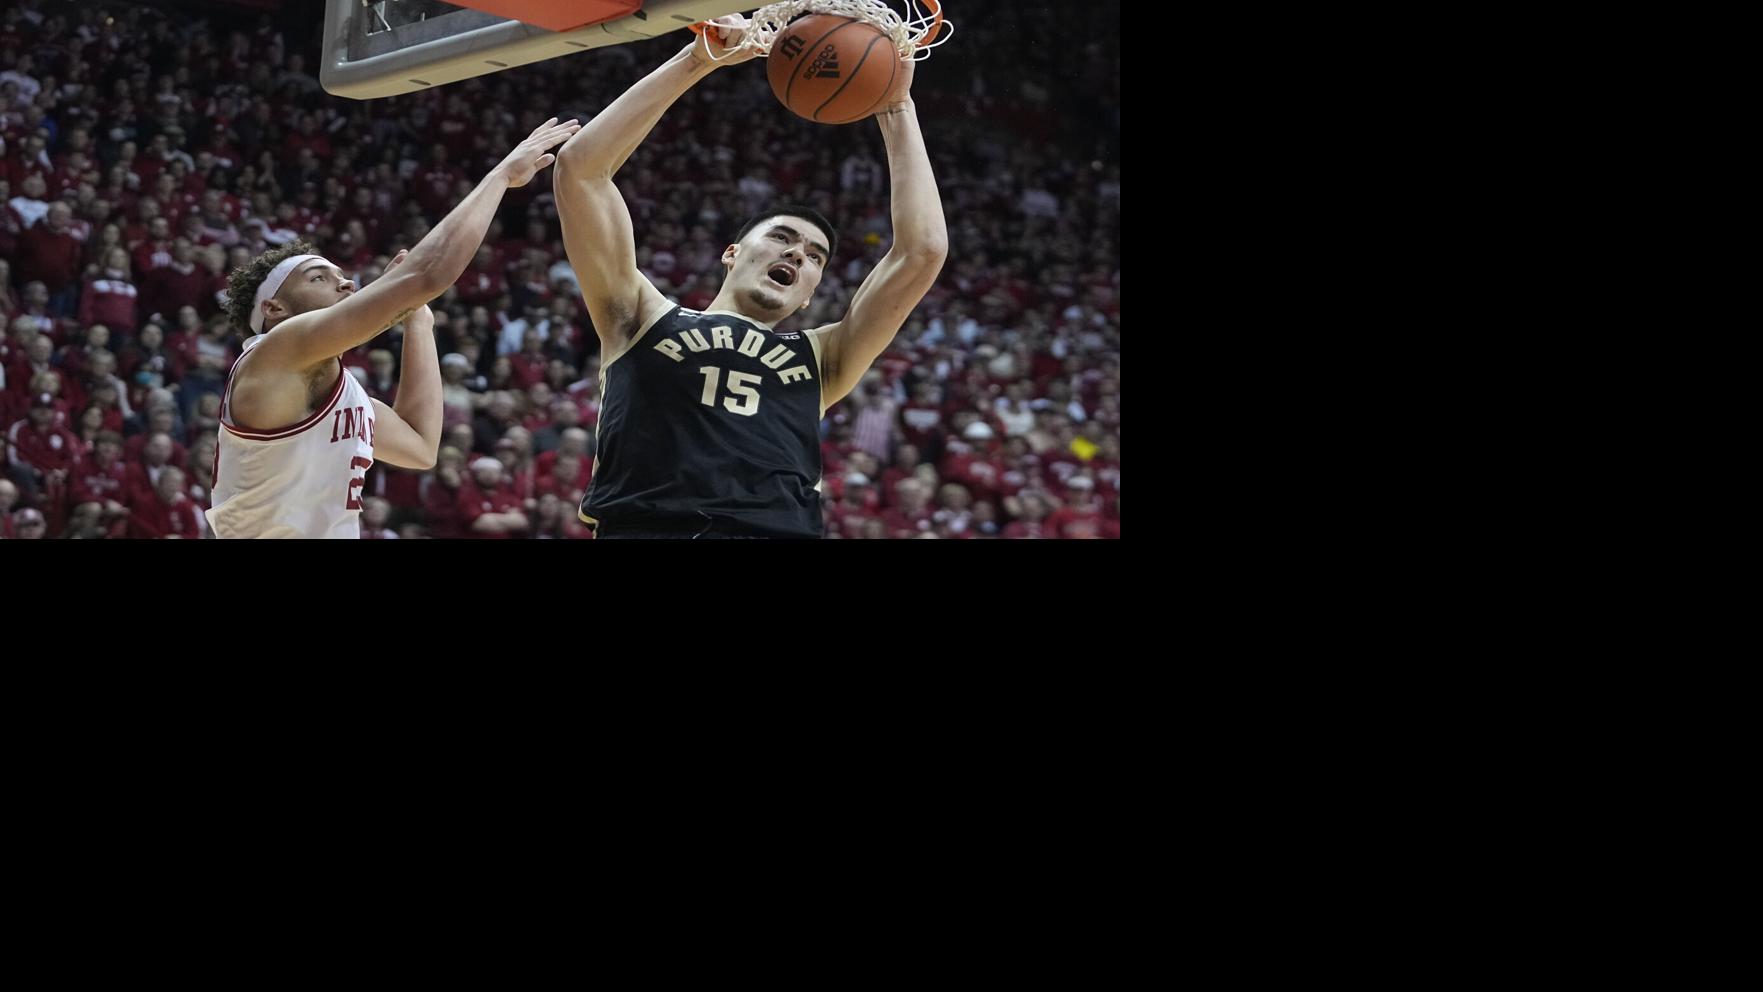 Purdue stays No. 1 in AP Top 25; NC State in at No. 22